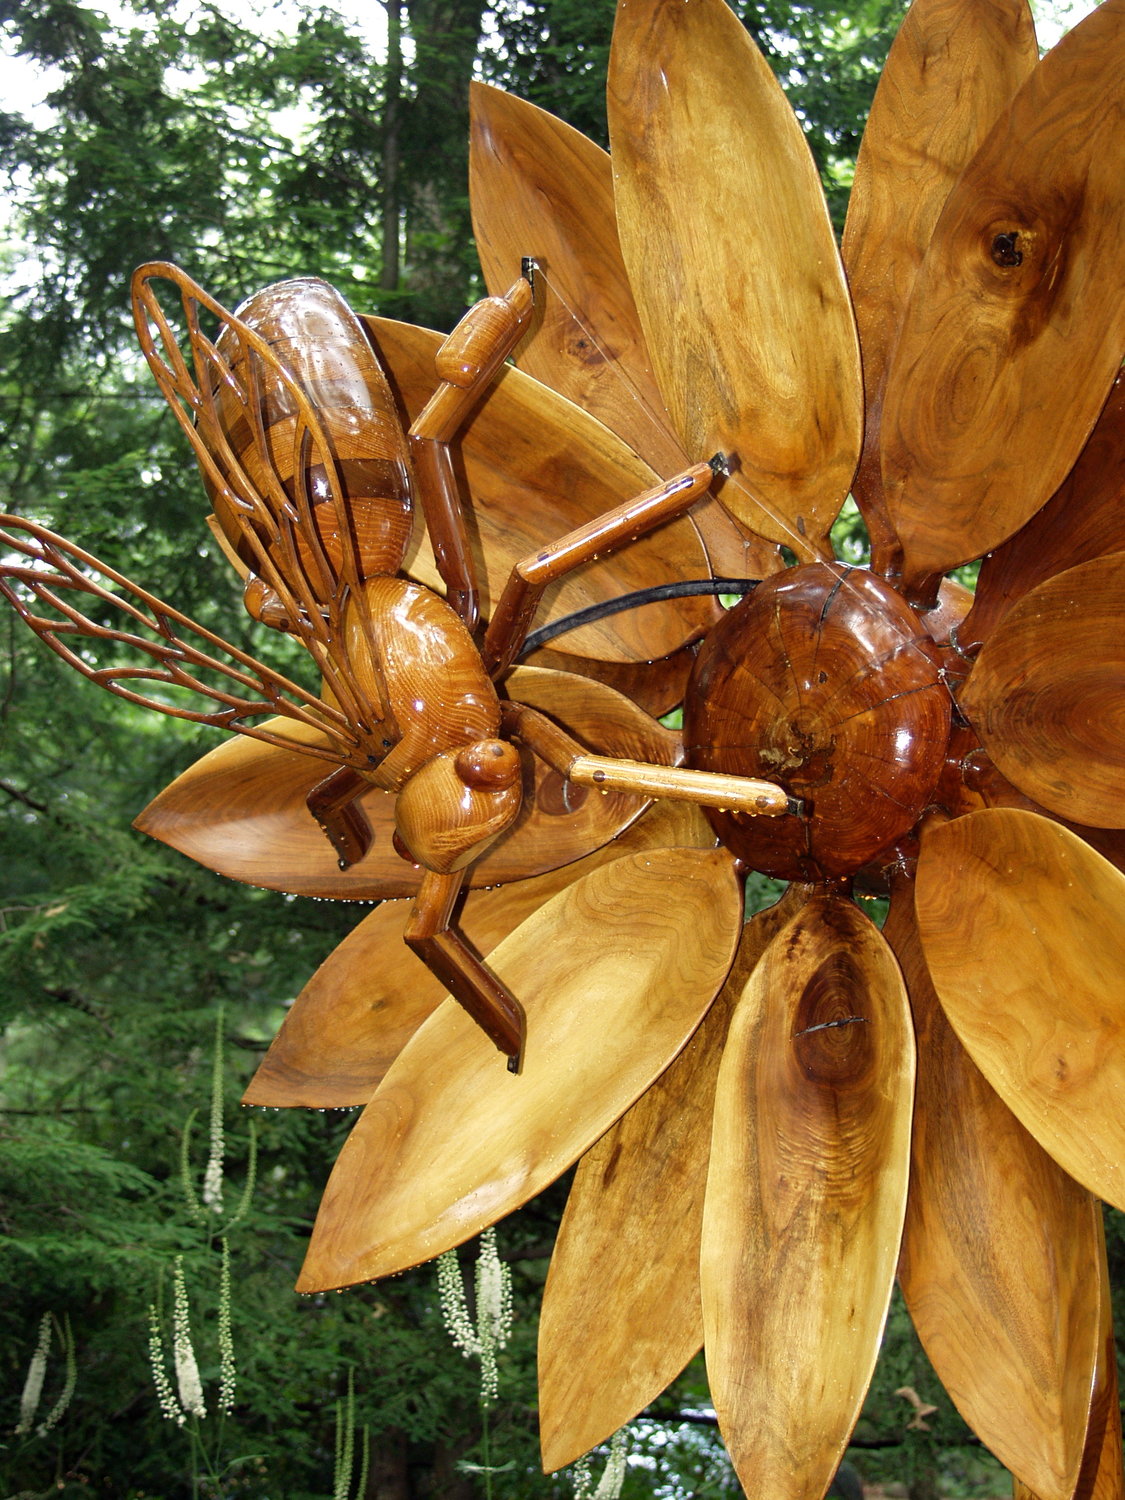 The sculpture of a bee pollinating a flower will also be at Green Animals.